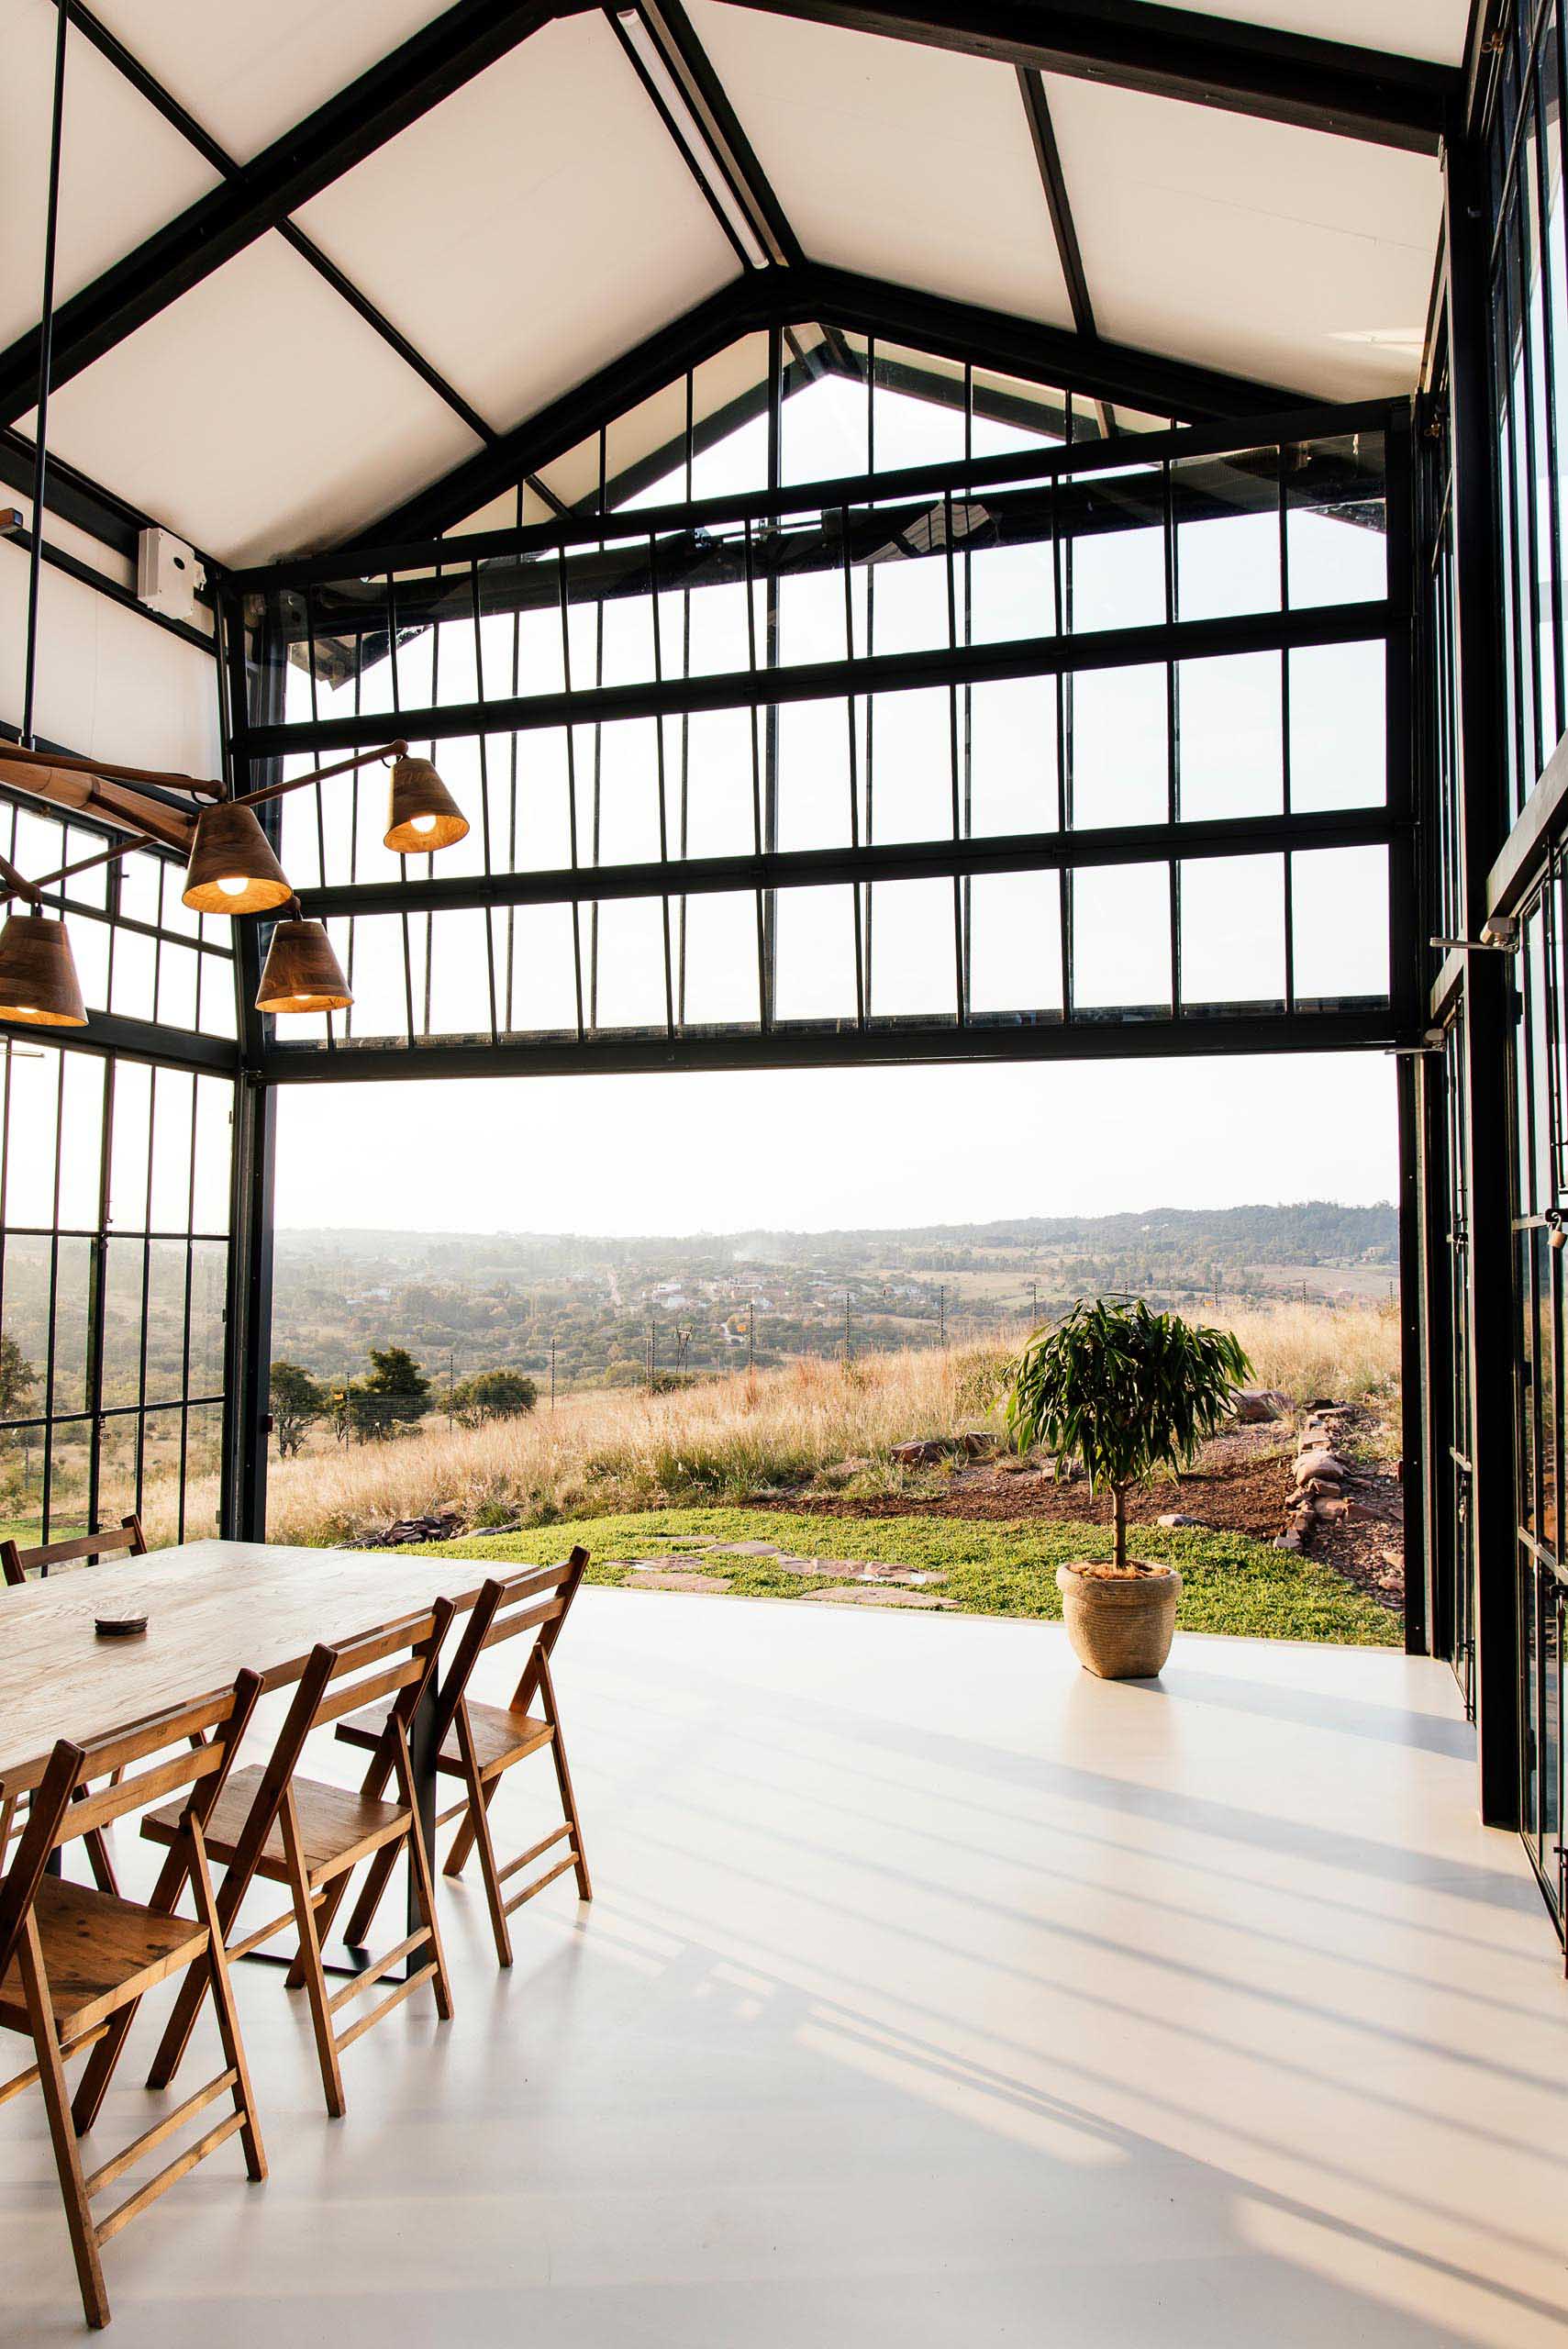 The double-height conservatory can be opened, providing uninterrupted views of the landscape, while a glass section flooring gives a glimpse of the lower level below.